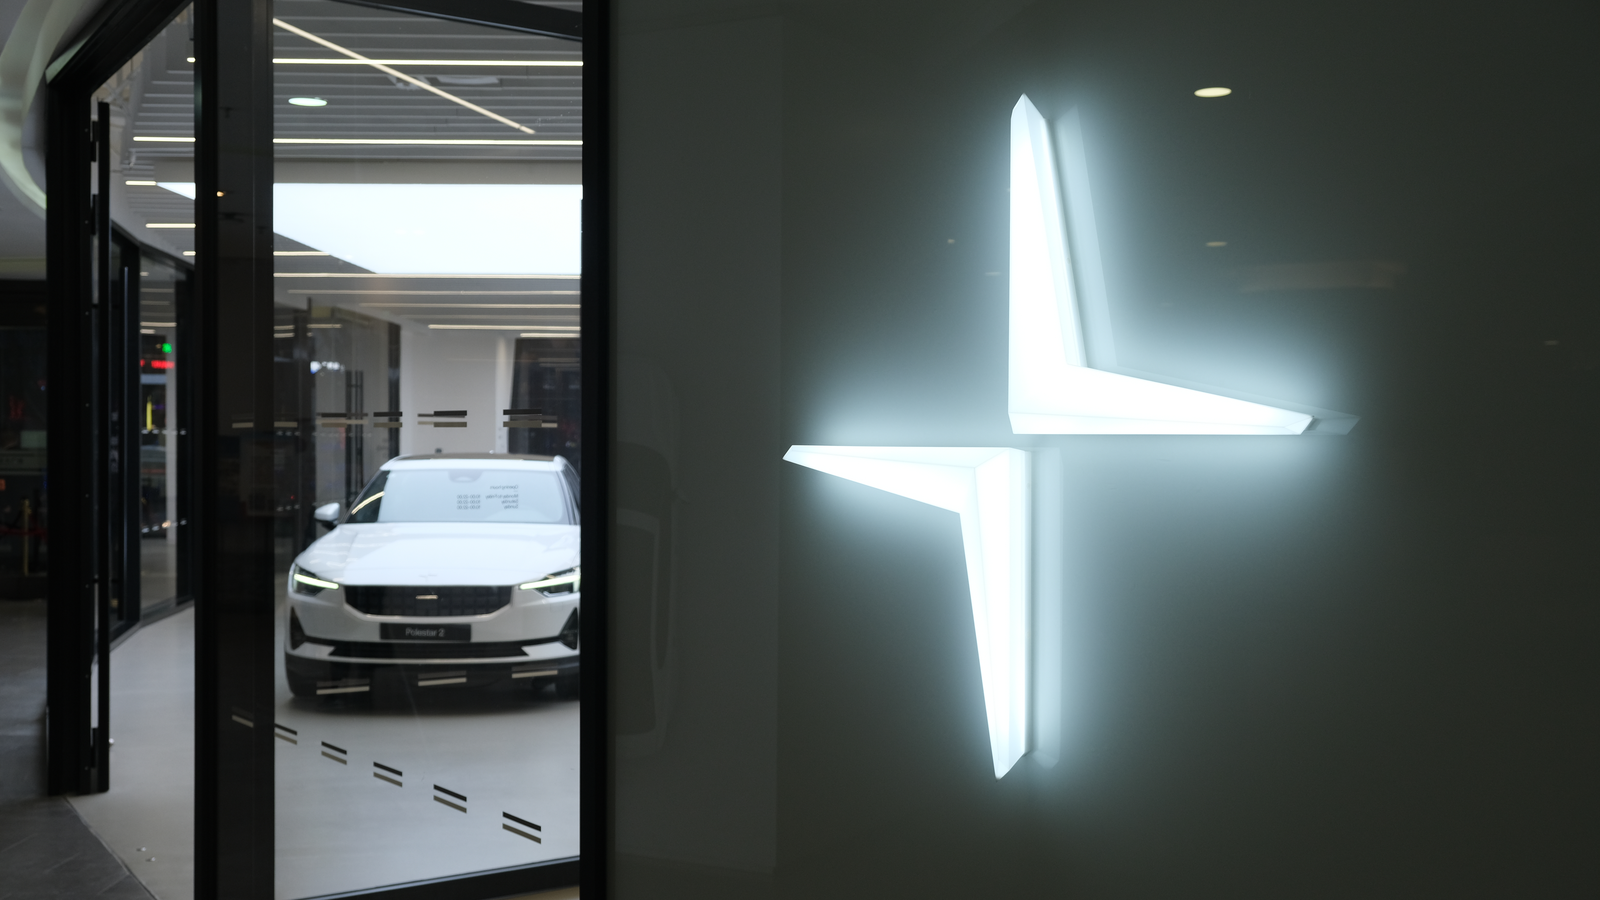 Close up Polestar logo with electric car in store. Polestar (PSNY Stock) is a Swedish automotive brand owned by Volvo Cars and Geely